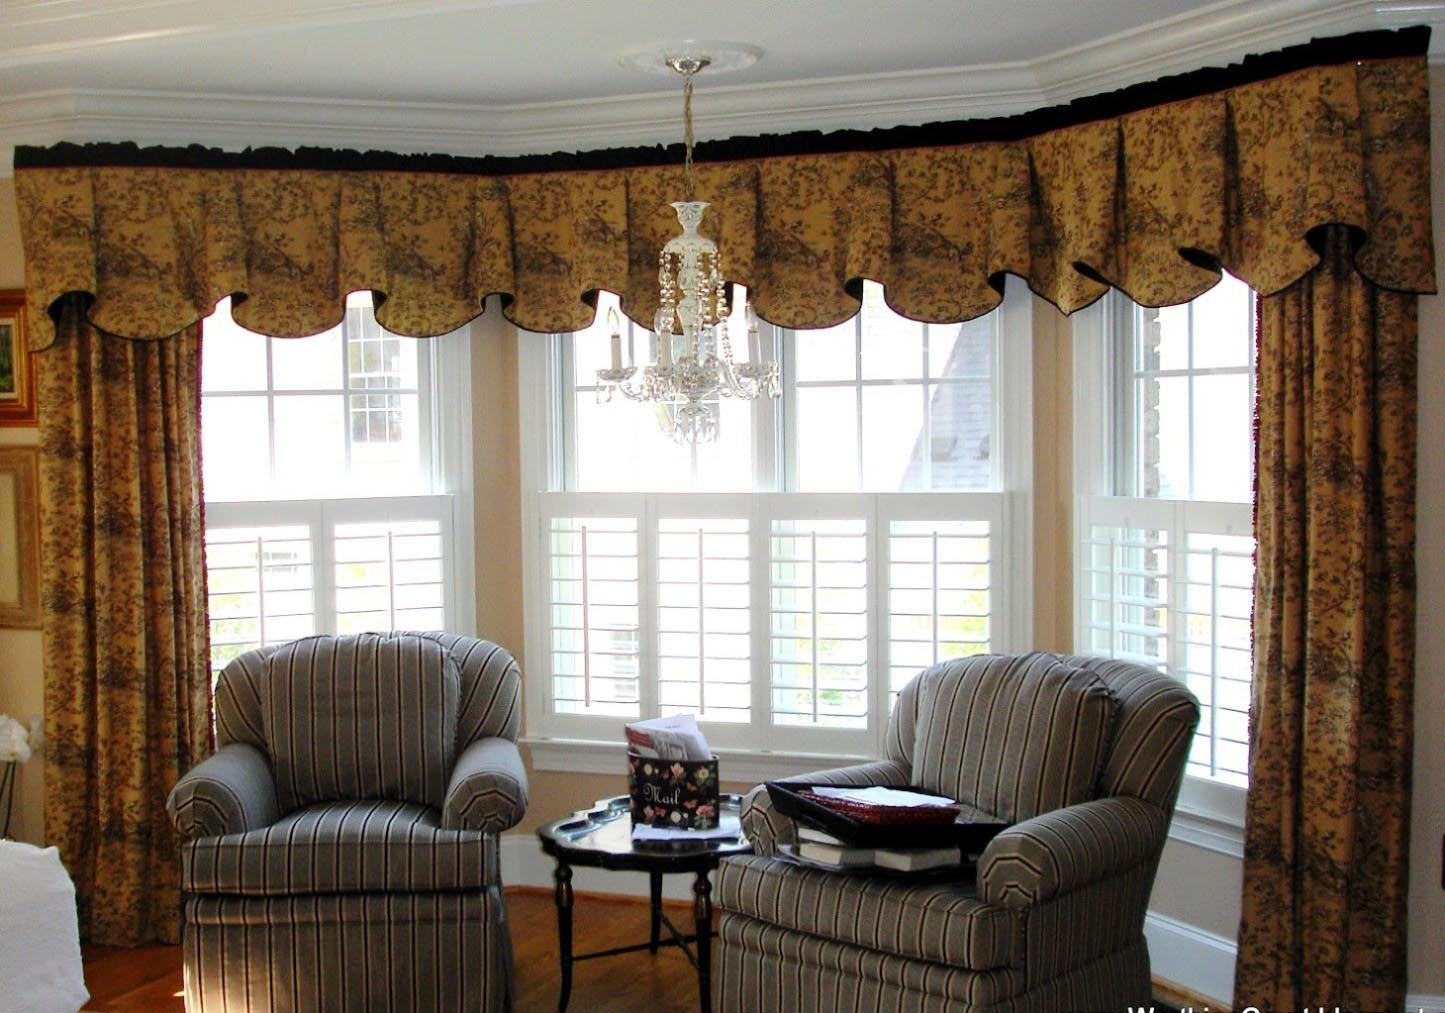 Curtain Valances For Living Room
 Window Treatments For The Living Room – Modern House